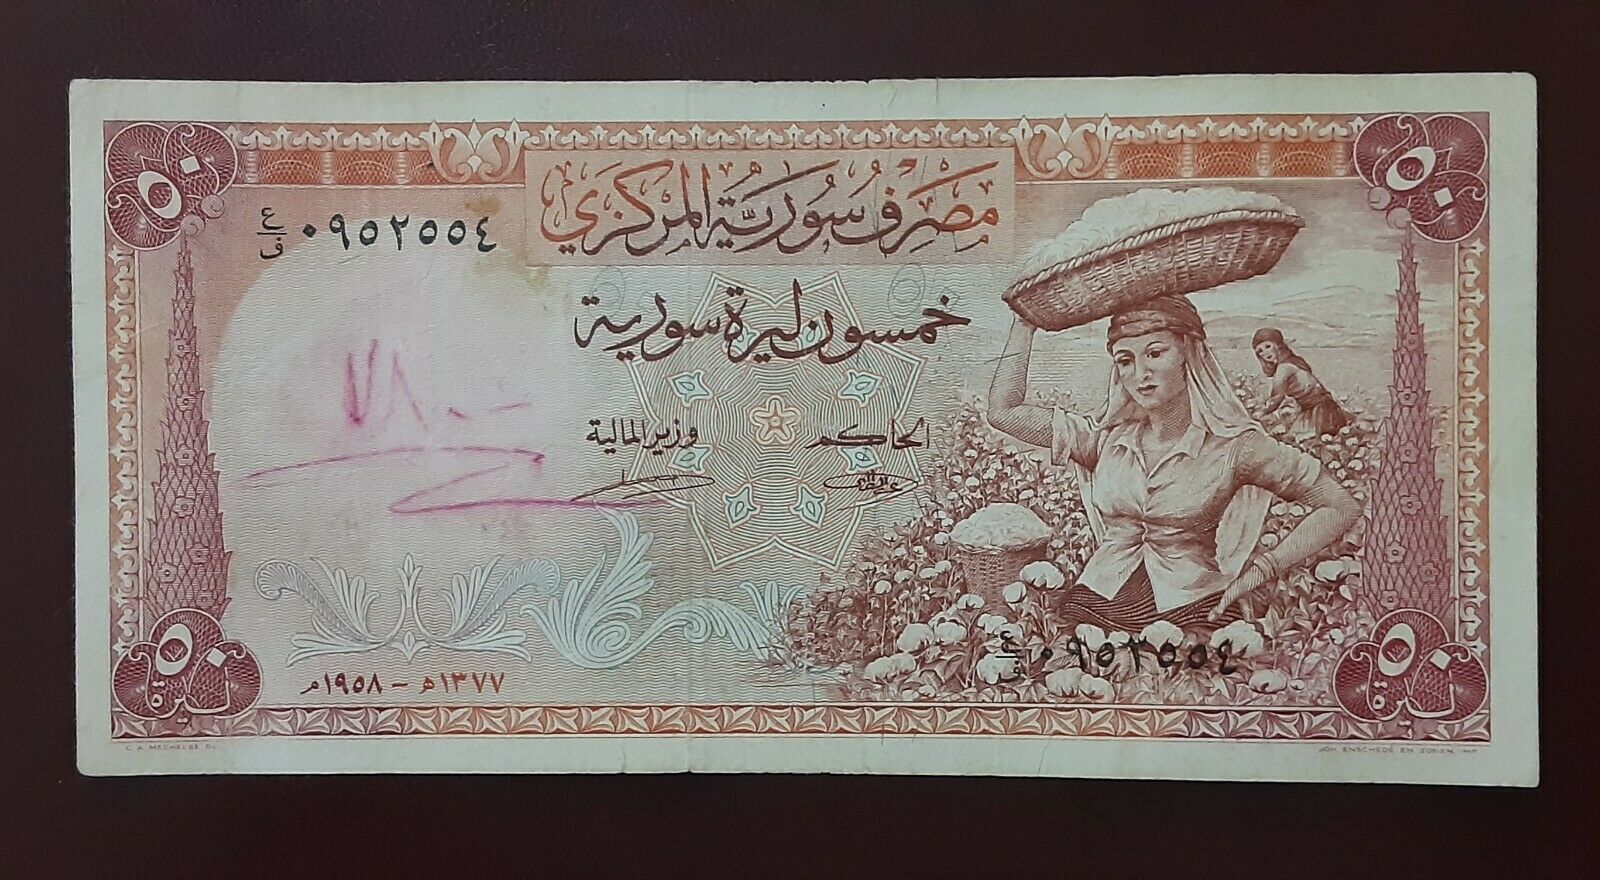 50 Syrian Pounds 1958 Uncommon Foreign Banknote